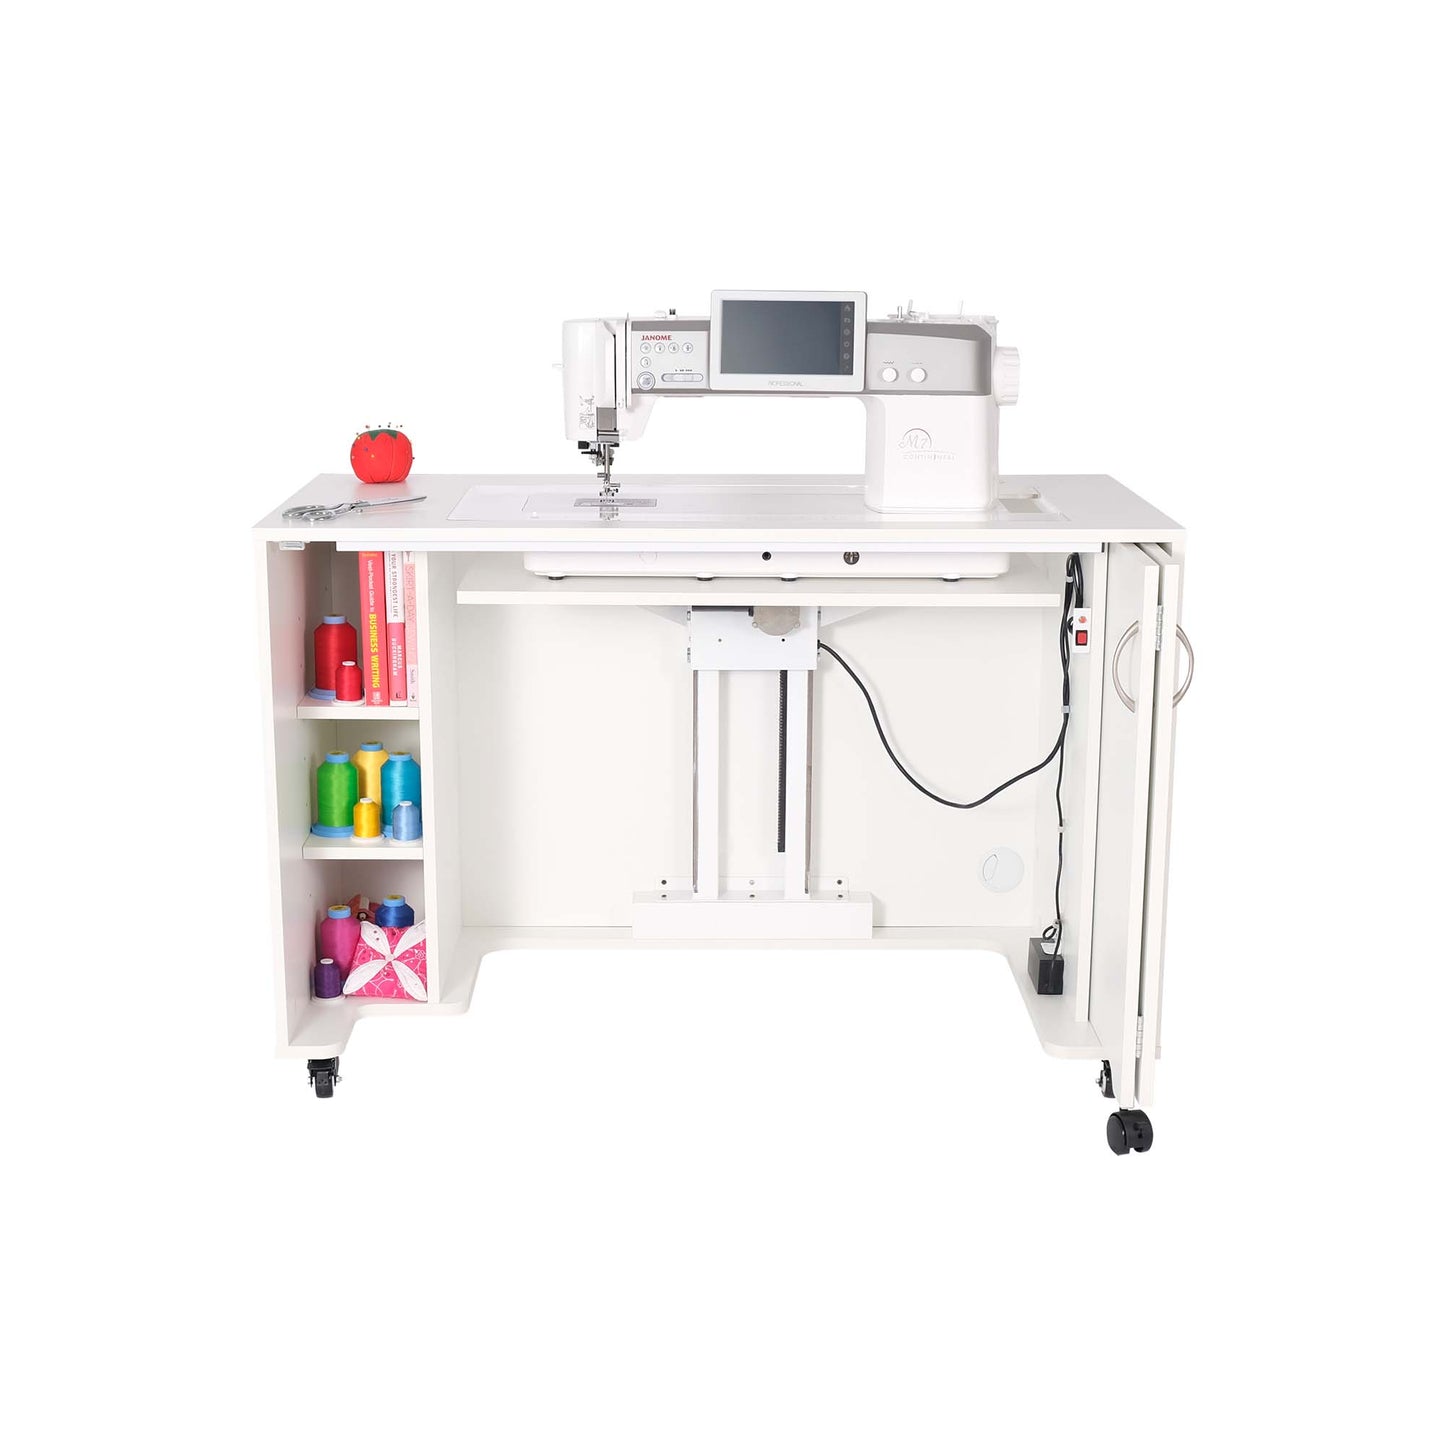 Kangaroo MOD Electric Sewing Cabinet and Embroidery Storage Cabinet Studio Set